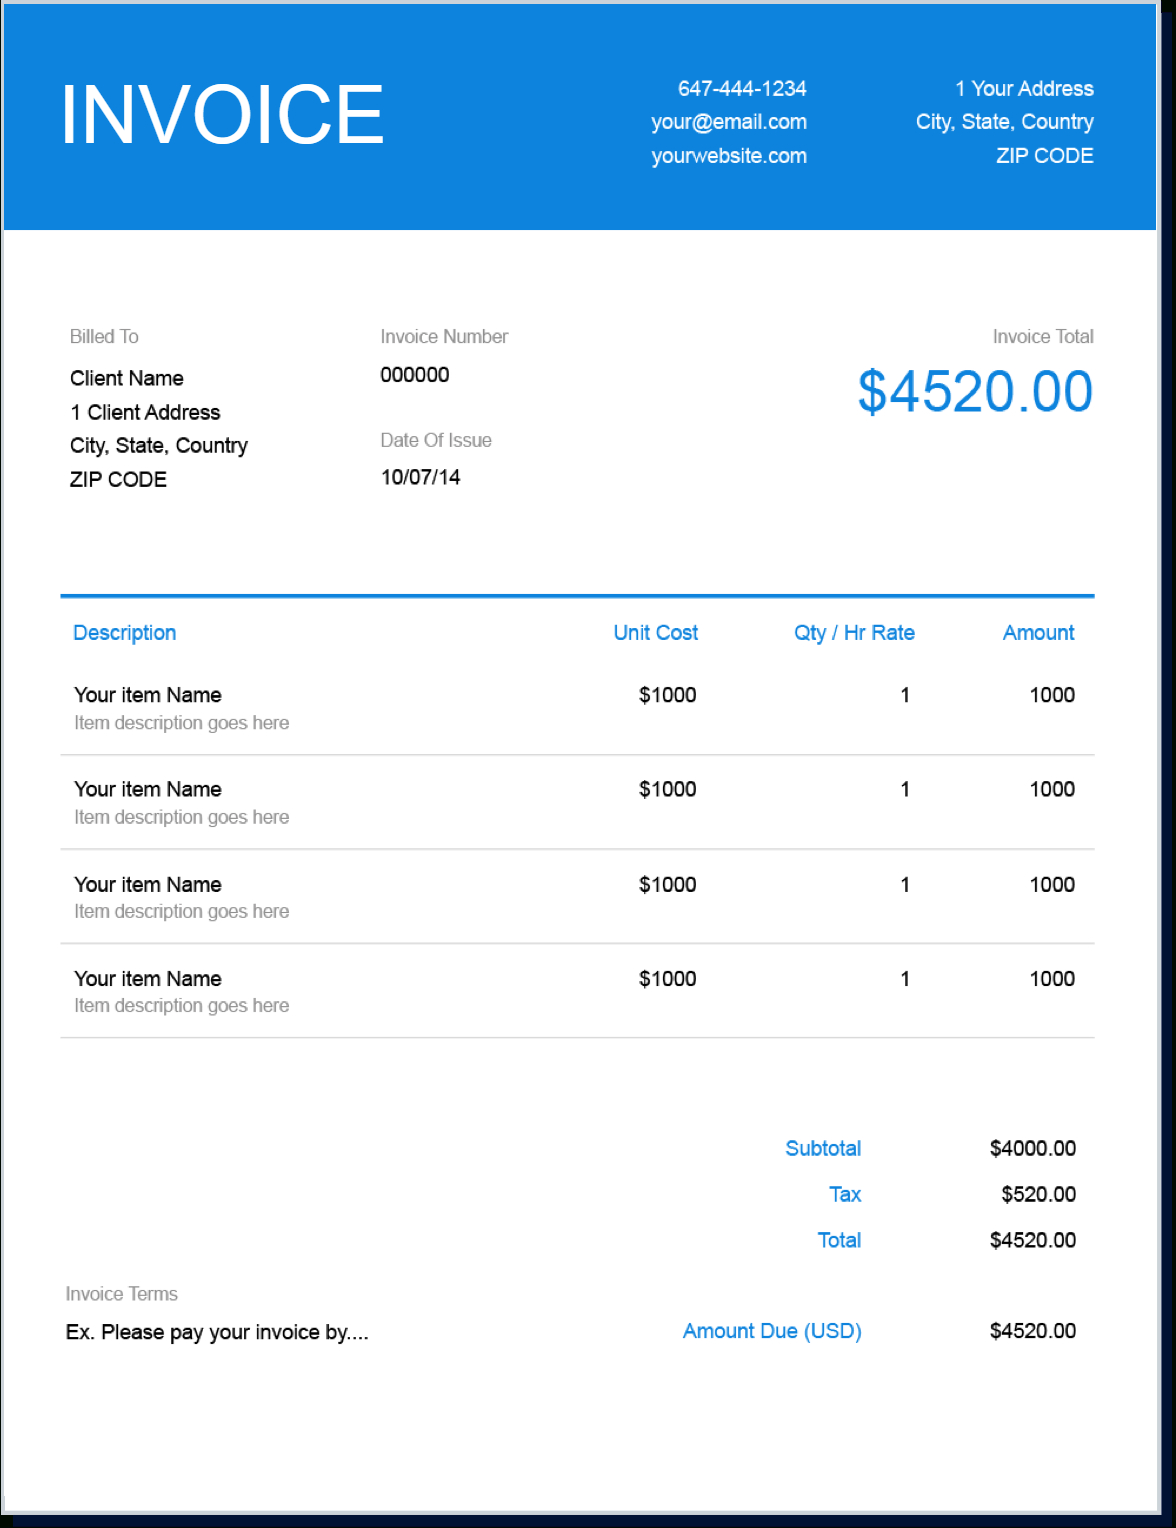 Invoice Template | Create And Send Free Invoices Instantly Regarding Free Downloadable Invoice Template For Word